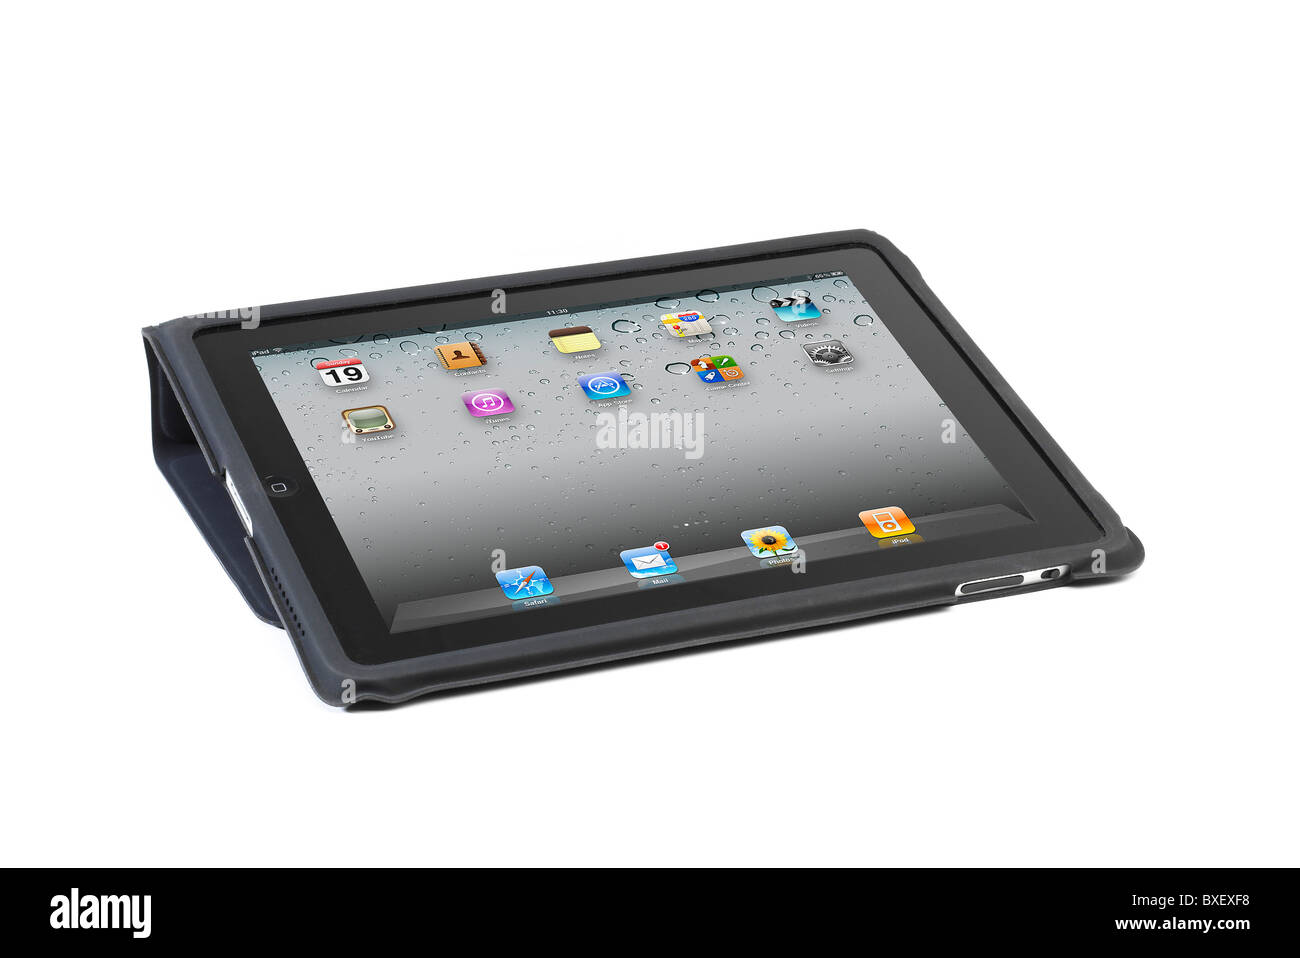 iPad with 4.2 screen and in standard Apple iPad case Stock Photo